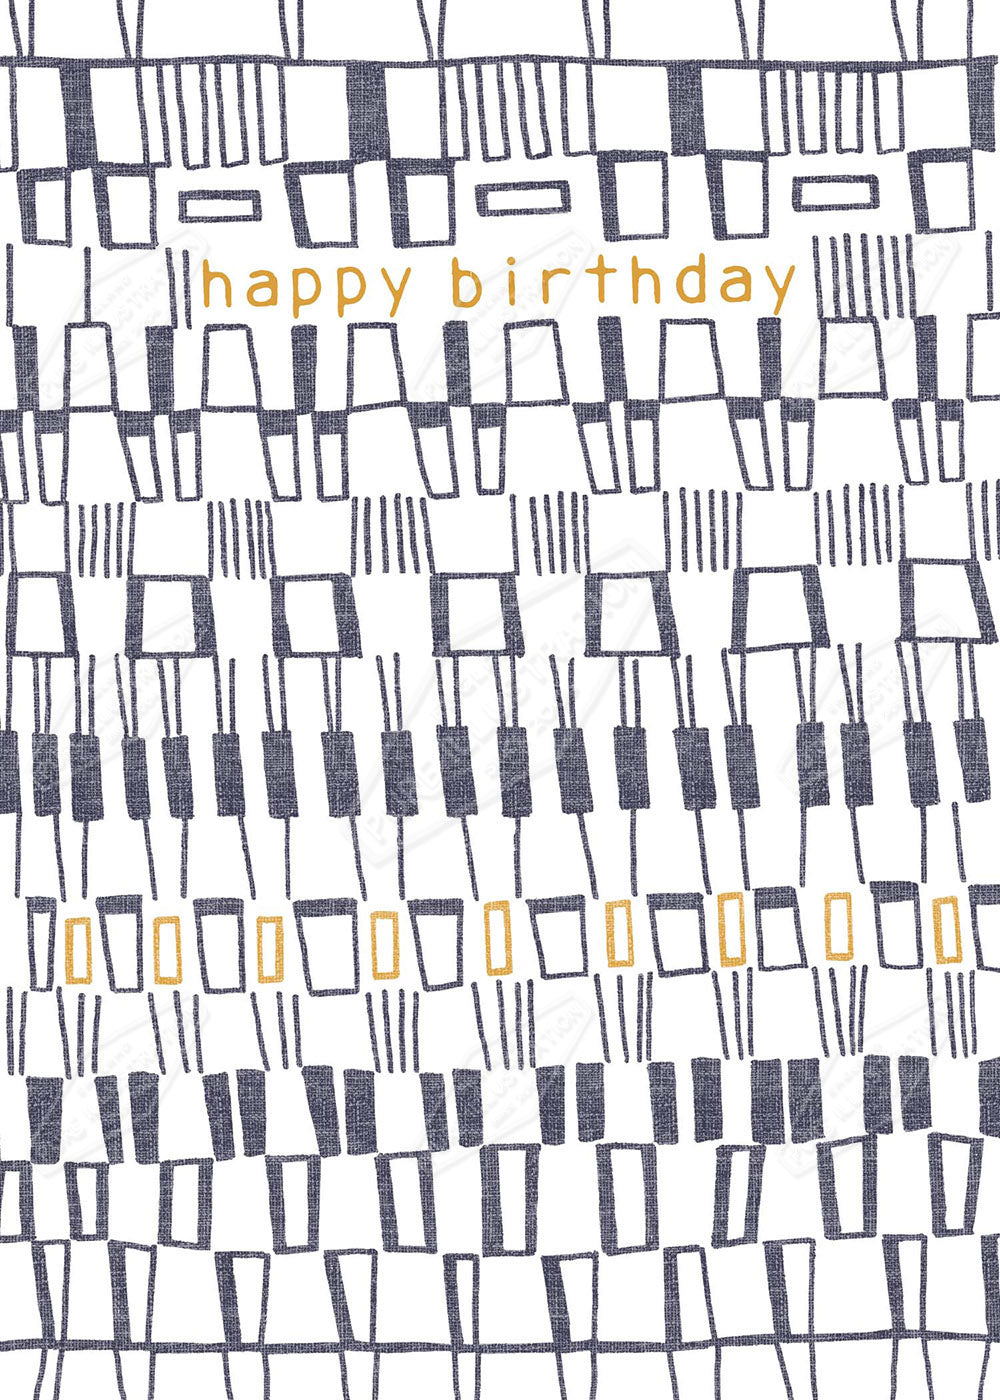 Ethnic Graphic Pattern Birthday Design by Pure Art Licensing Agency & Surface Design Studio